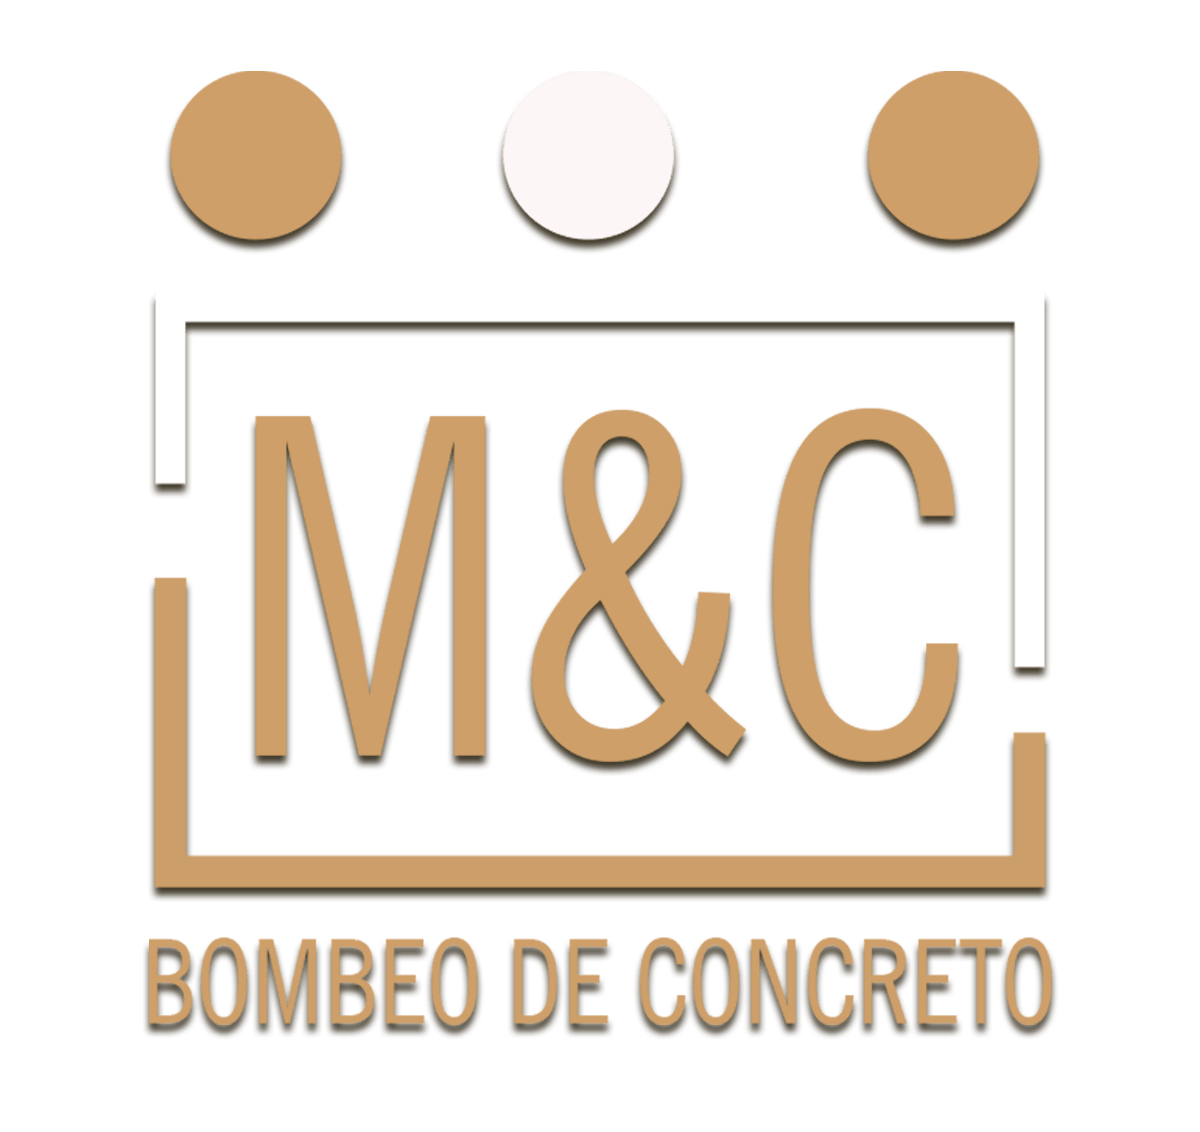 building-more-sustainably-how-construction-can-change-m-c-bombas-de